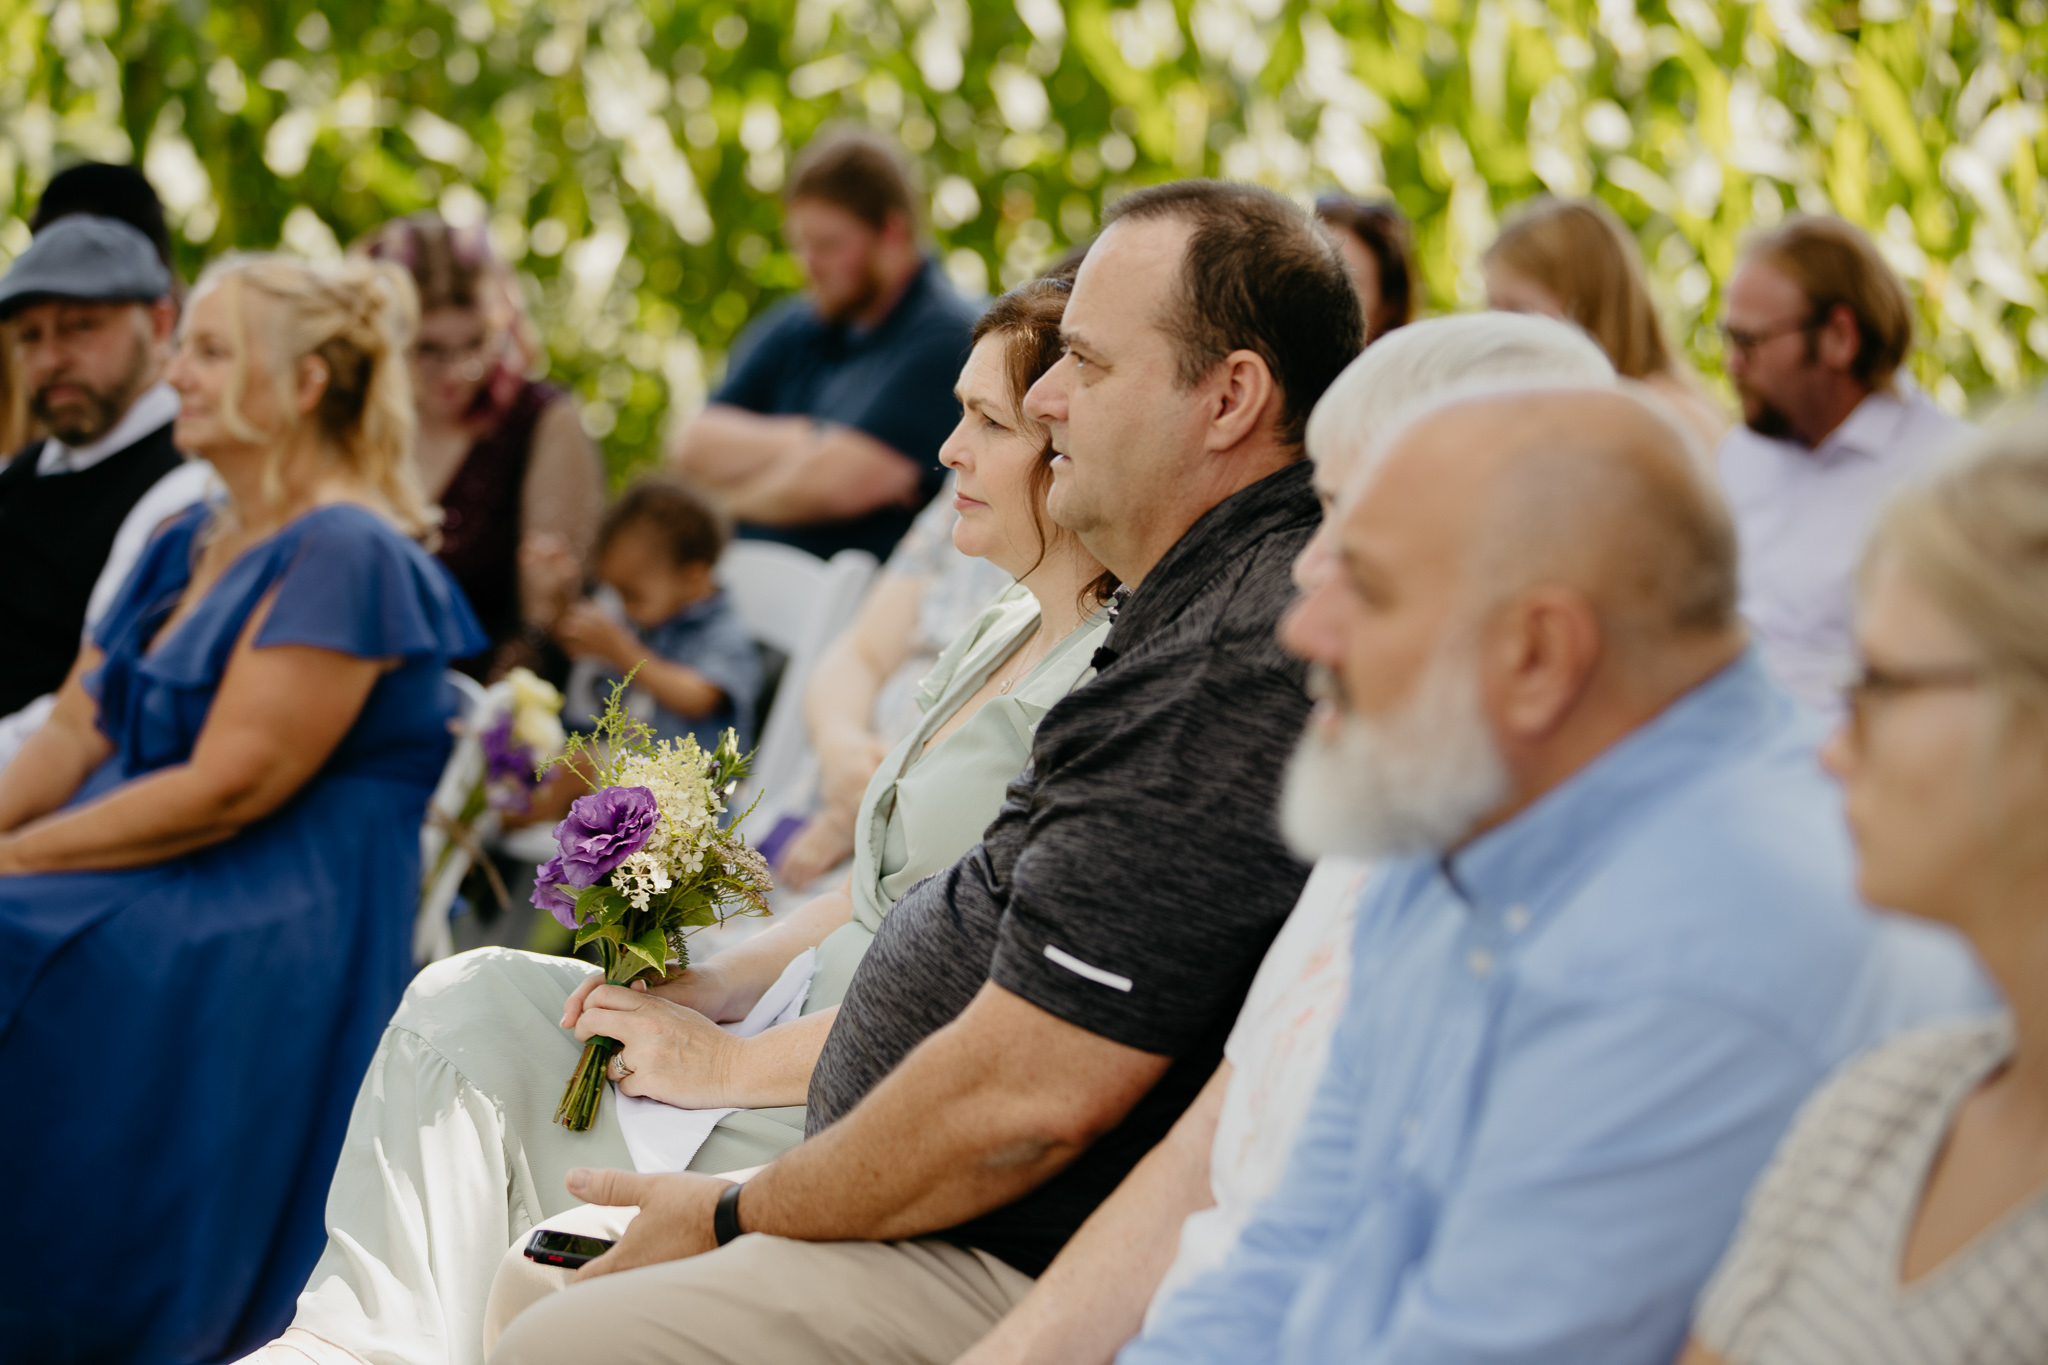 Intimate Indiana Outdoor Wedding in Summer // Ceremony among the trees